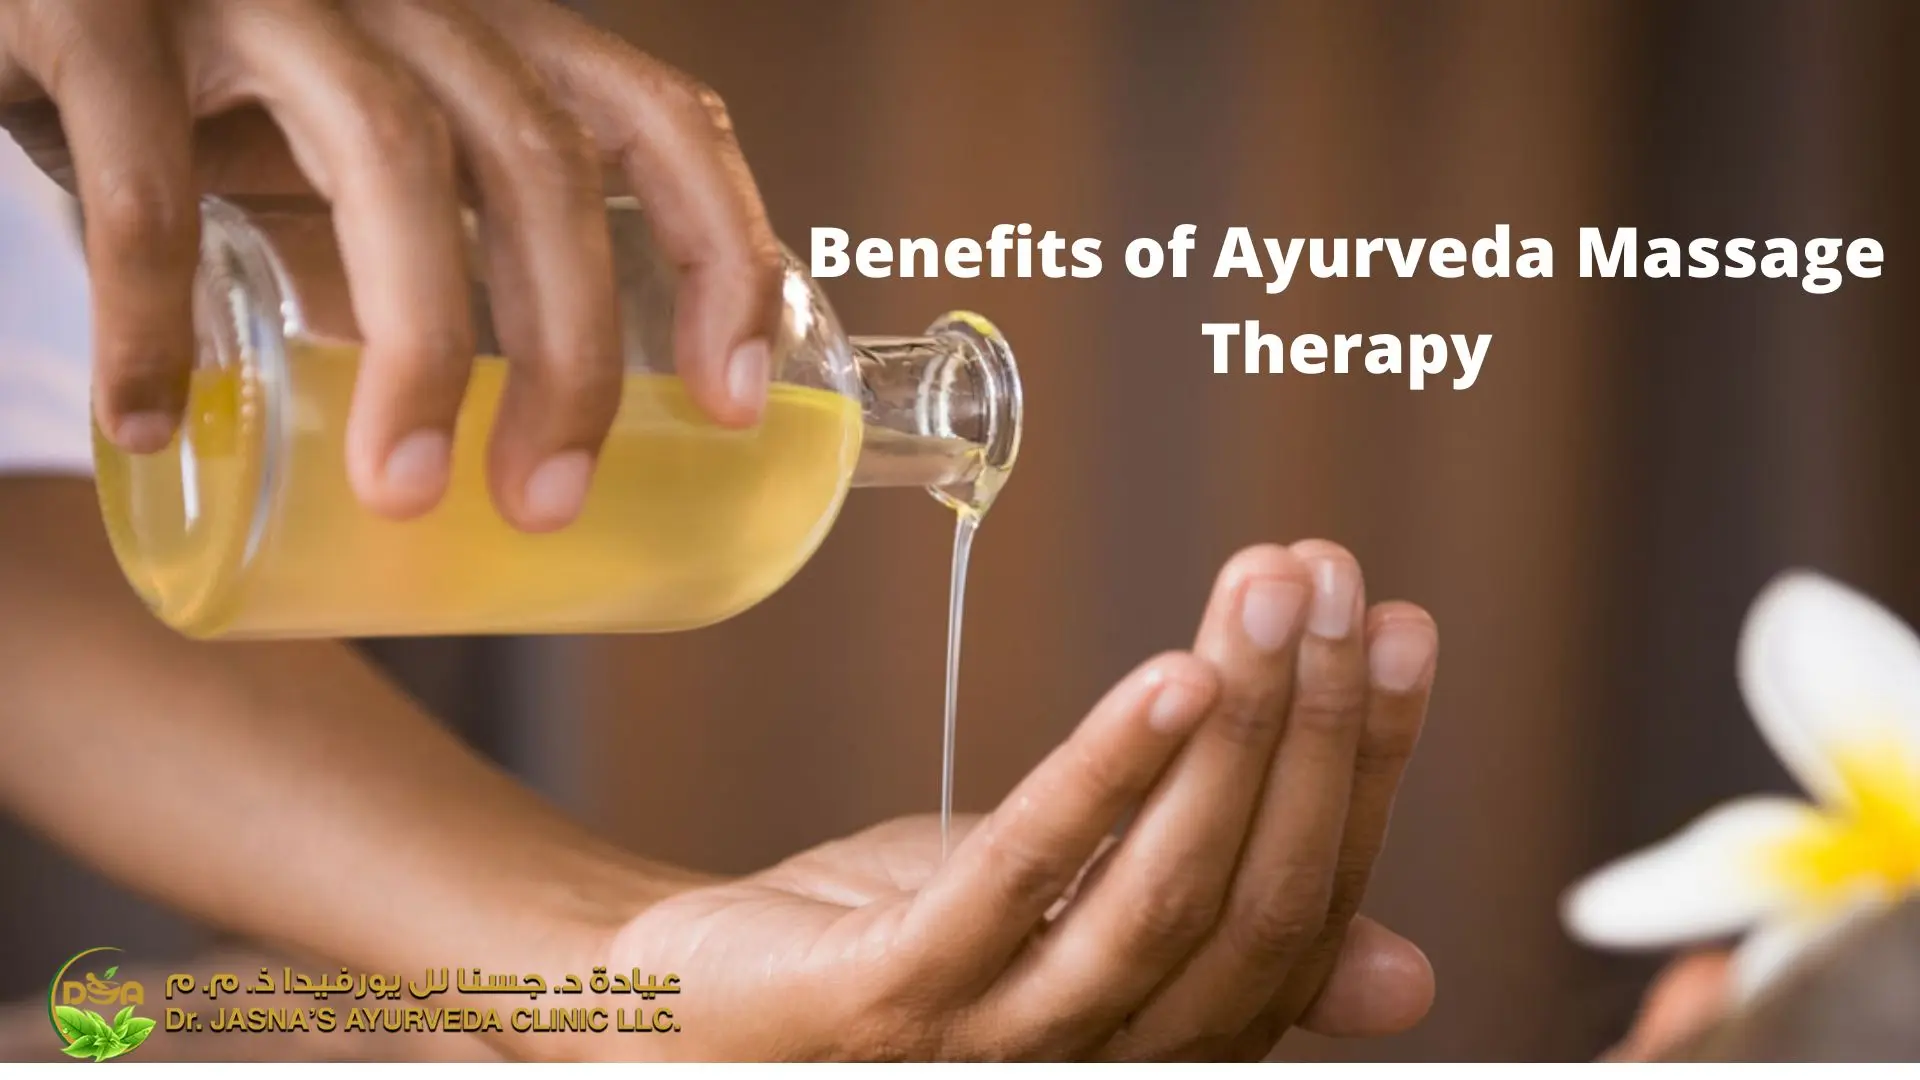 ayurvedic yoga massage - What is the difference between Ayurvedic massage and regular massage